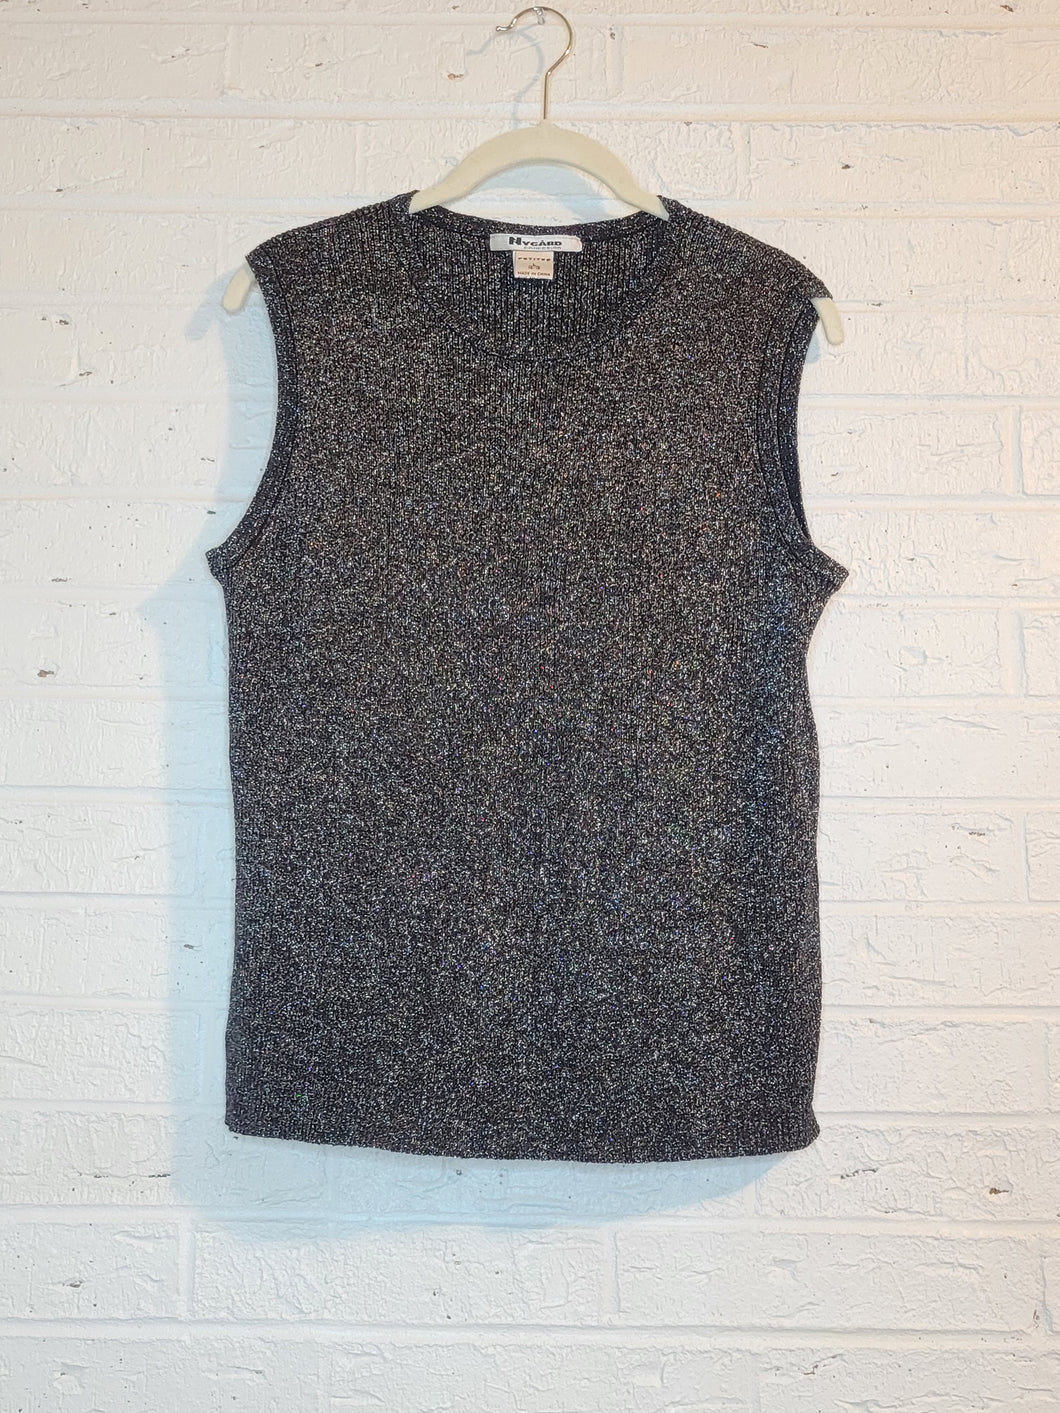 L - sparkly silver tank sweater